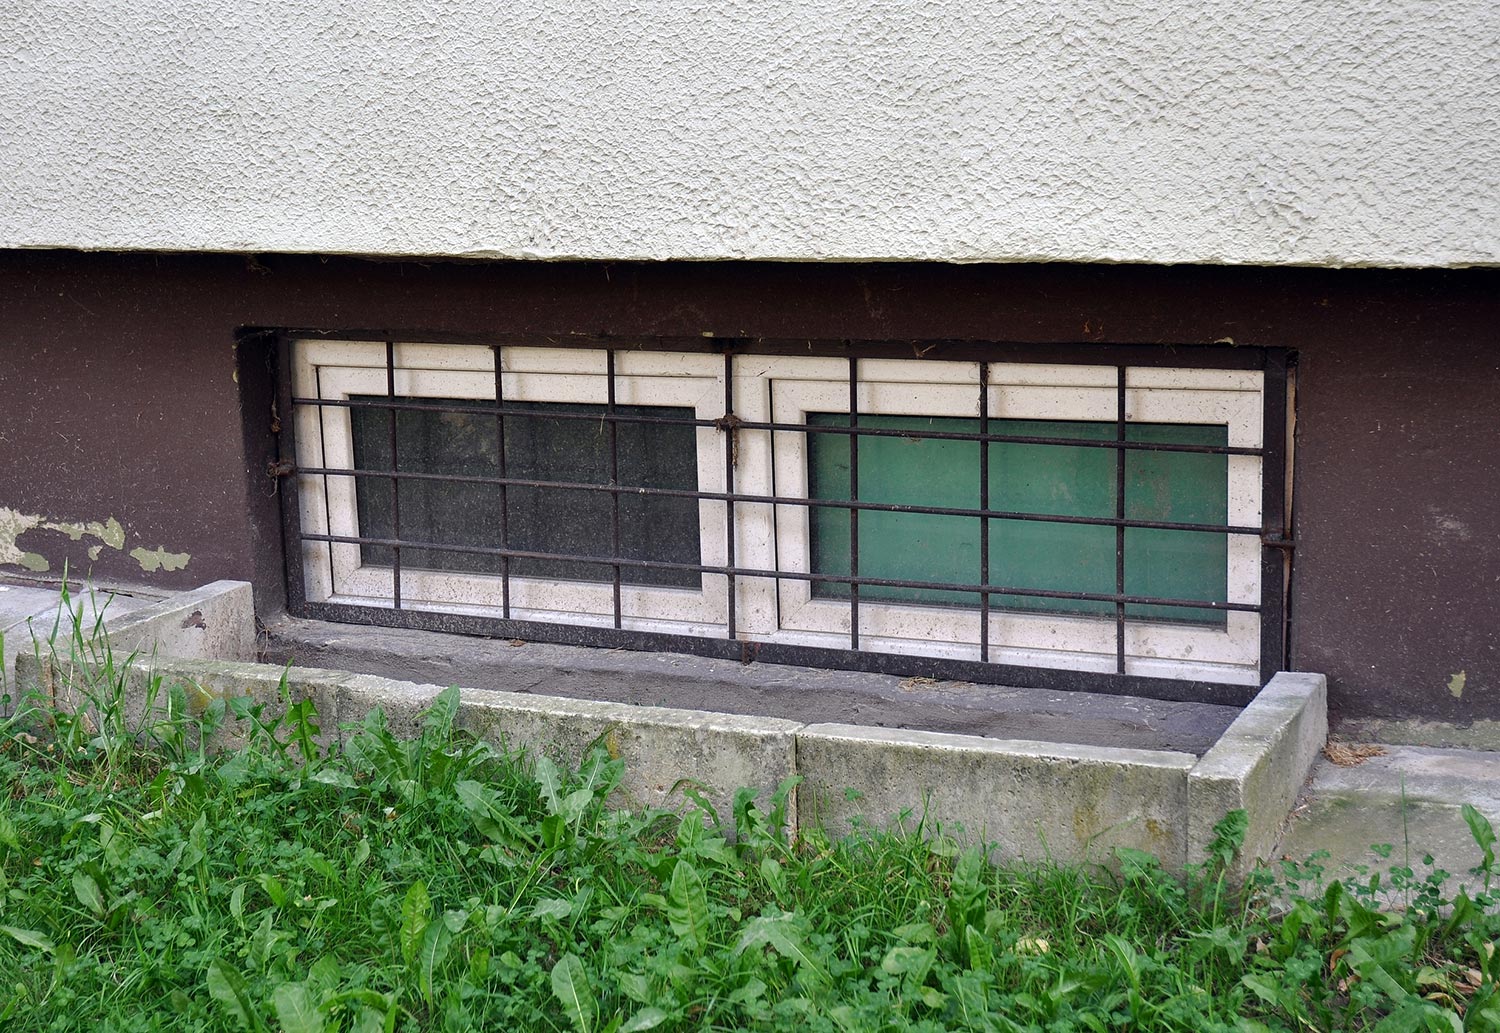 Barred basement window of a residential building